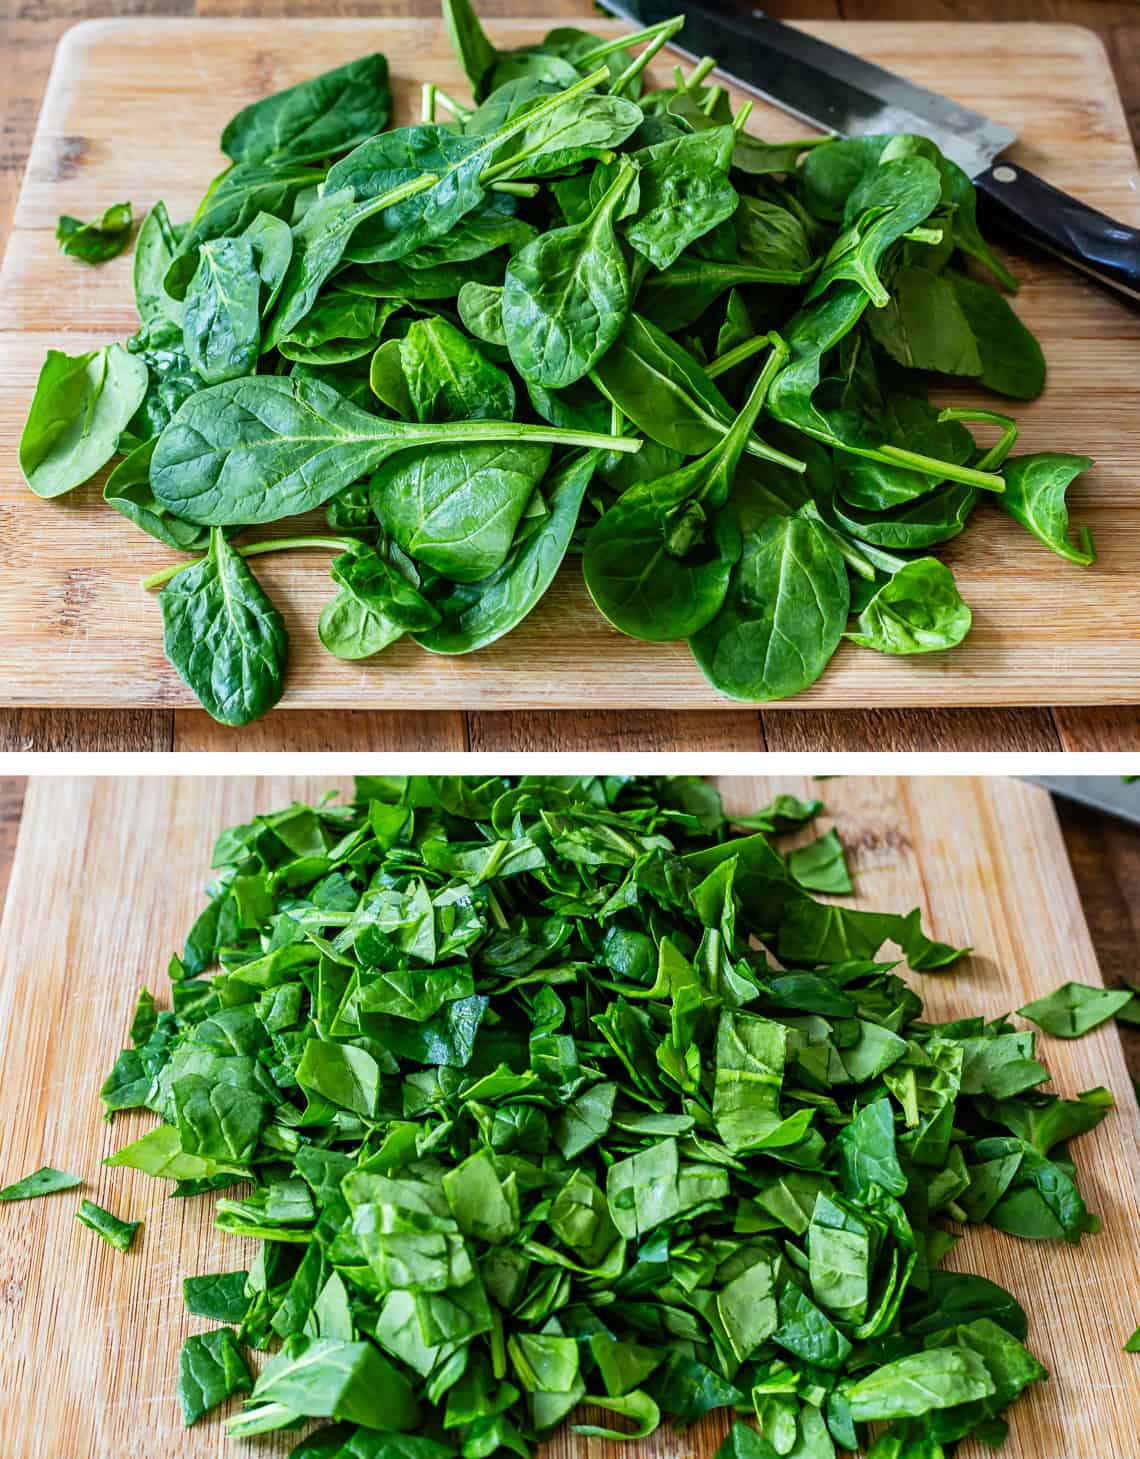 top uncut spinach leaves on a cutting board, bottom same leaves now chopped.